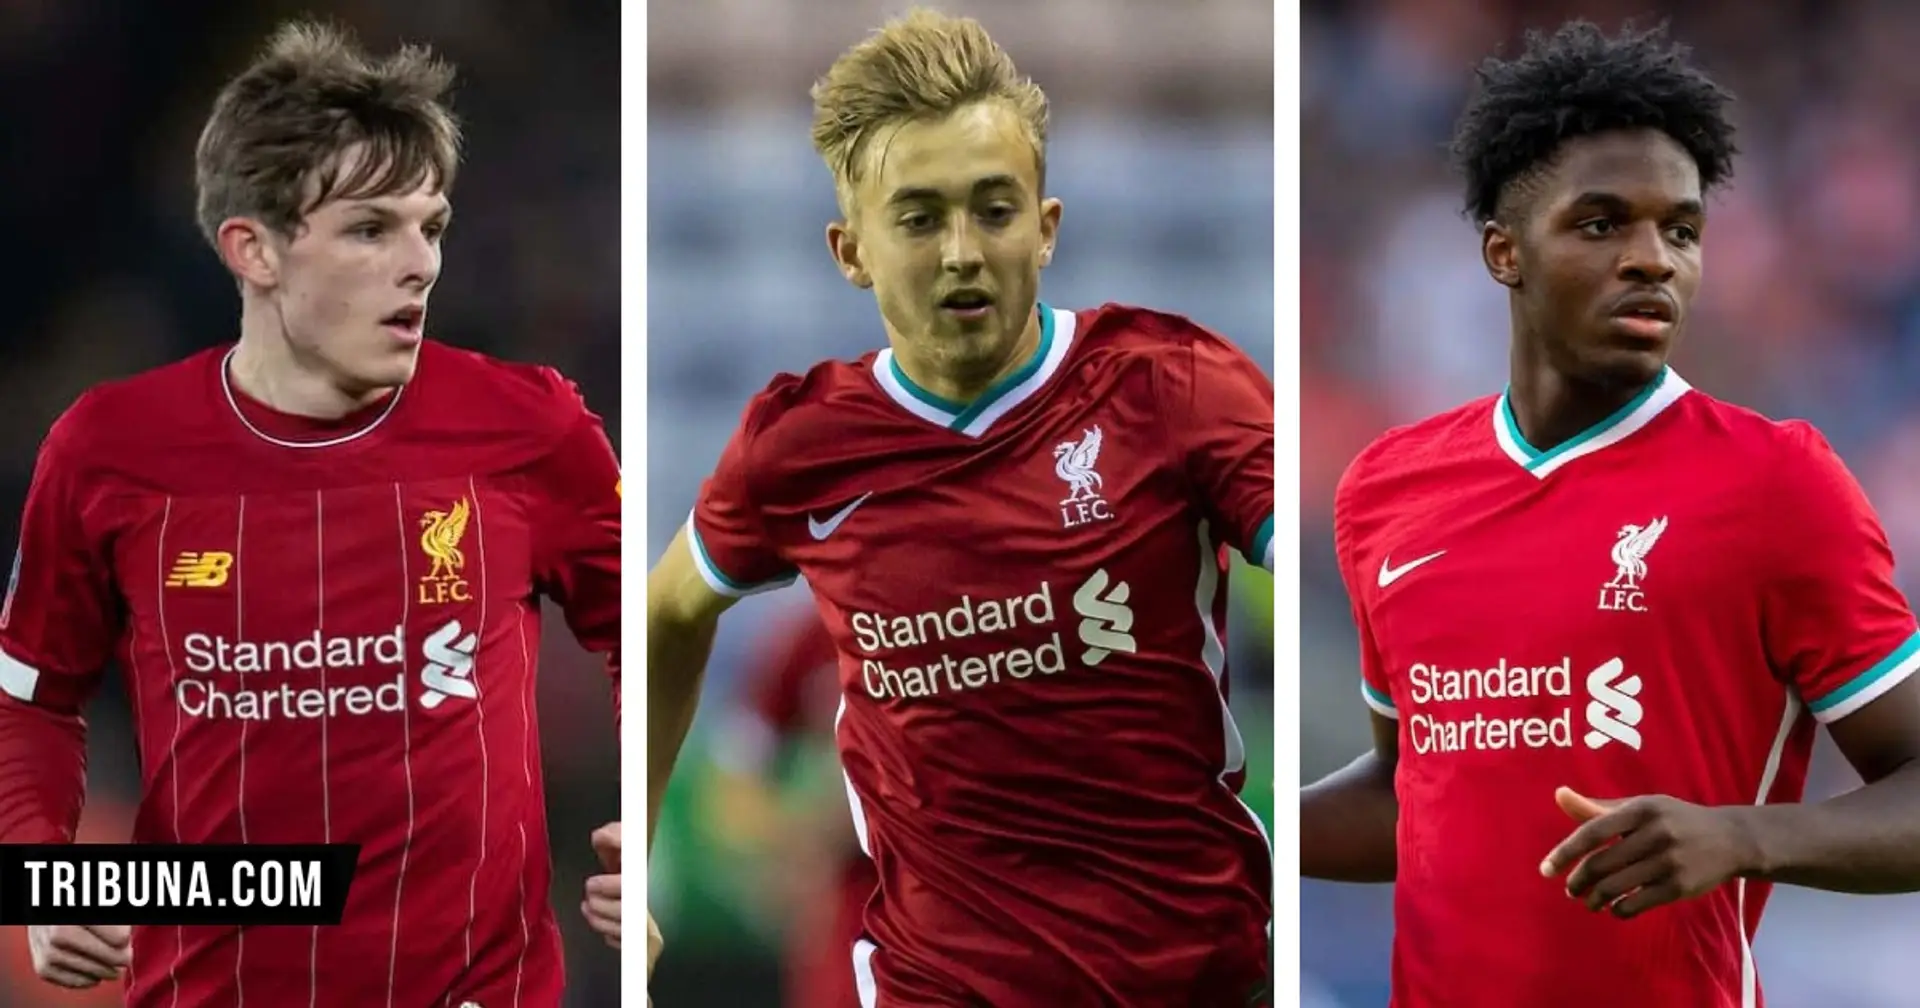 Who are Clarkson, Cain, and Koumetio? Find out about Liverpool's youngsters set for CL action in 3 sentences each